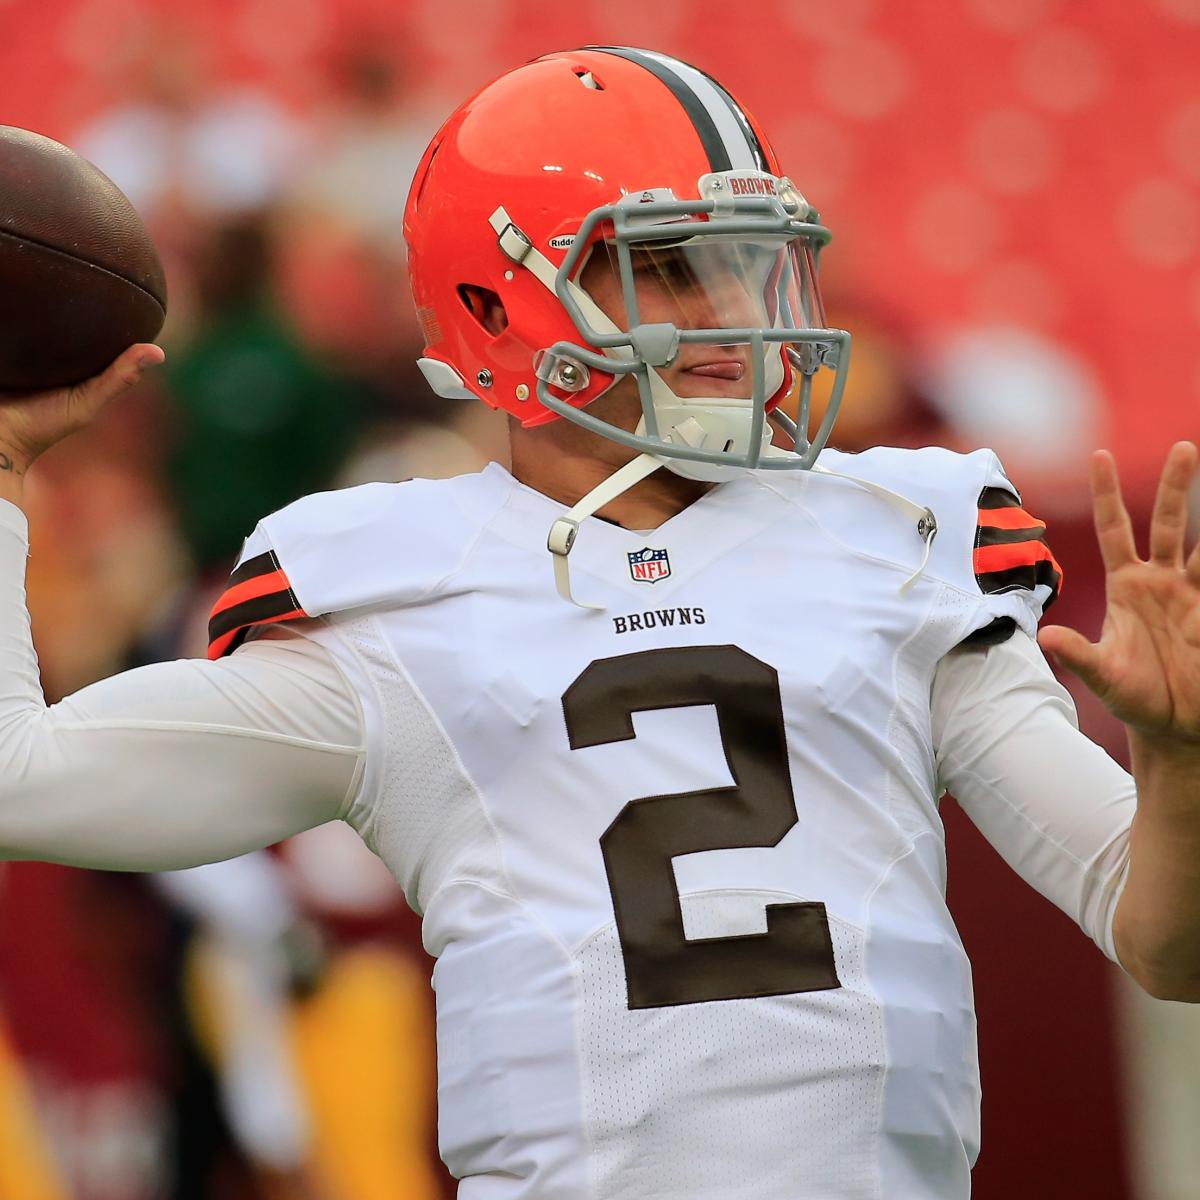 Johnny Manziel's Tenure as Cleveland Browns Backup QB Will Be Extremely